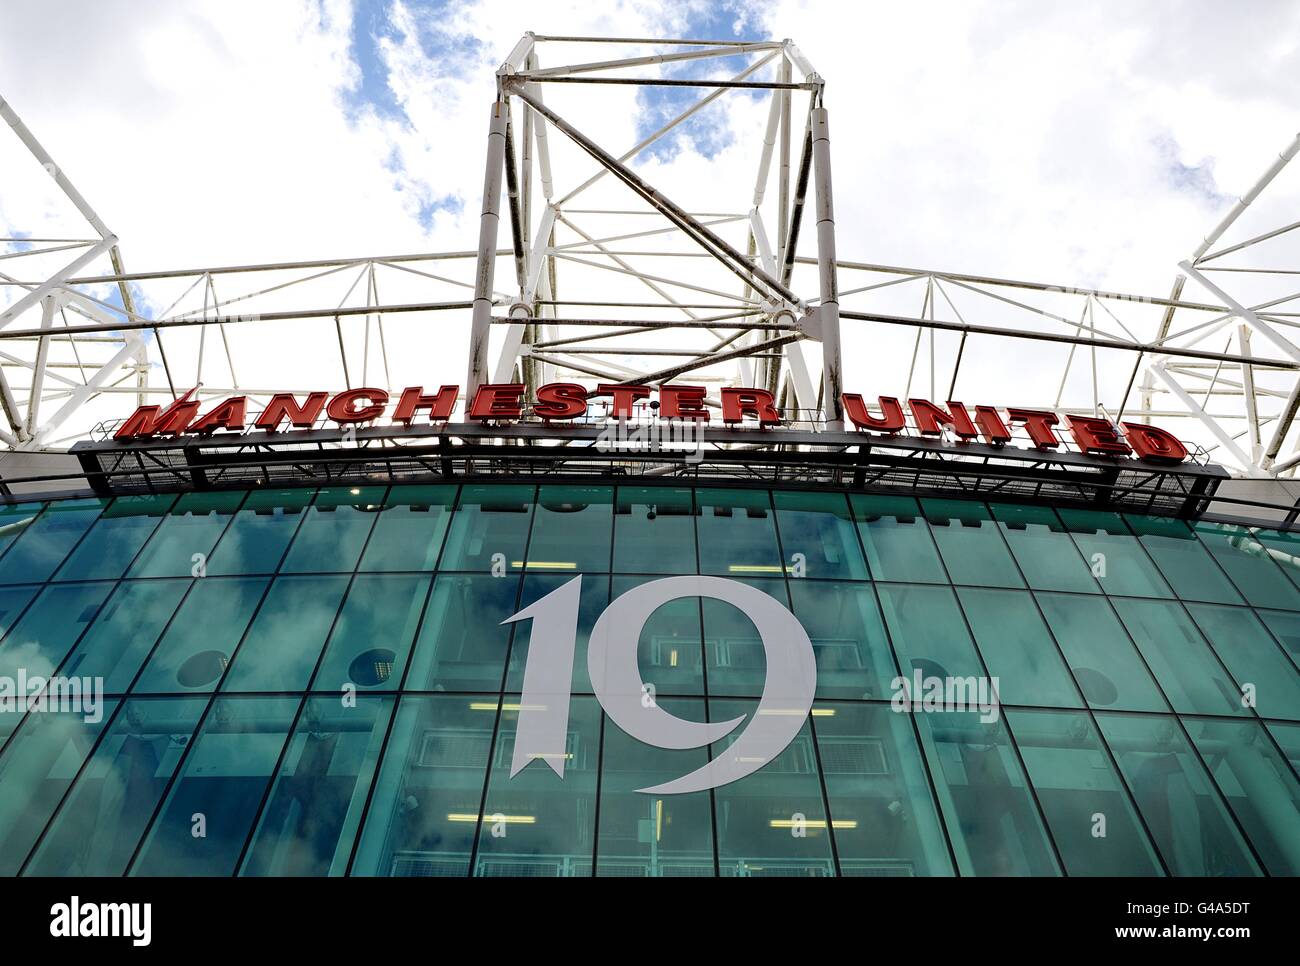 Soccer - Barclays Premier League - Manchester United v Blackpool - Old Trafford. General view of a '19' sign outside Old Trafford referring to the 19 league titles won by Manchester United. Stock Photo